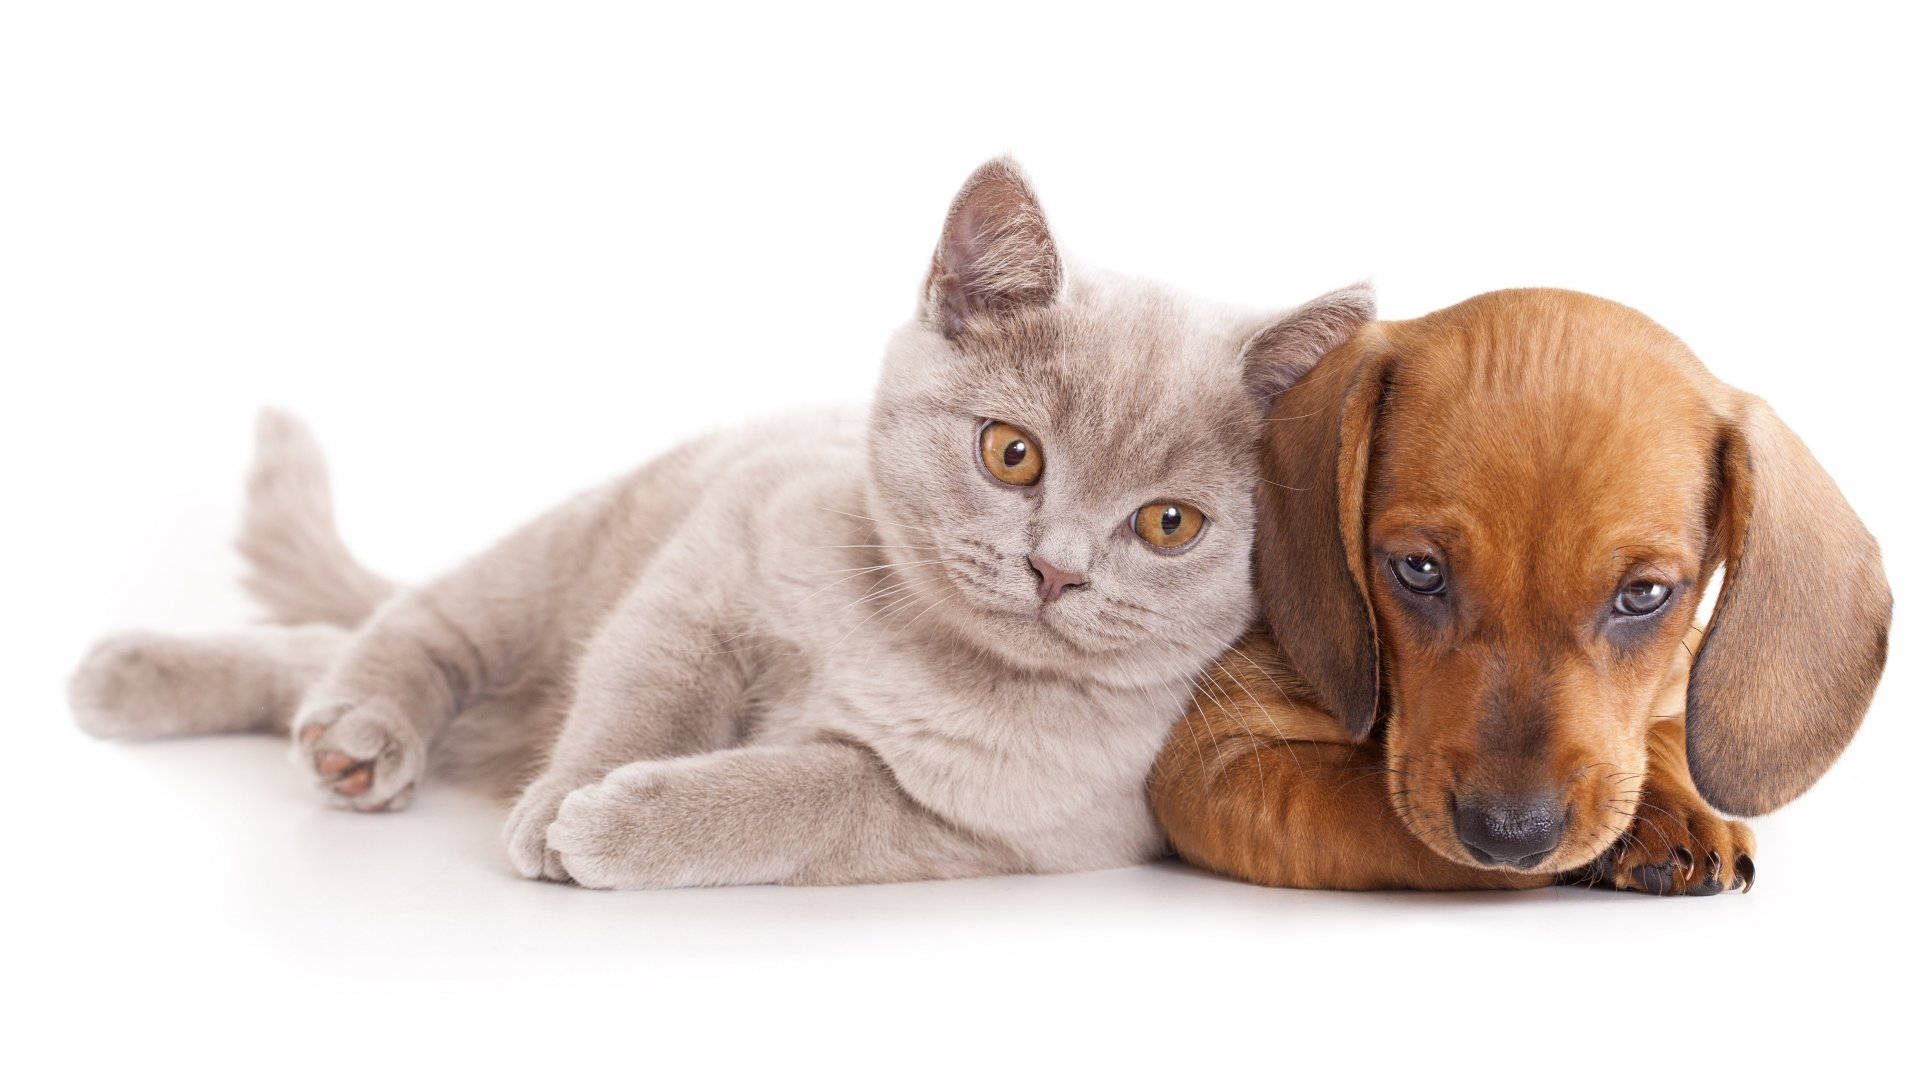 Free Cat And Dog Wallpaper Downloads, Cat And Dog Wallpaper for FREE